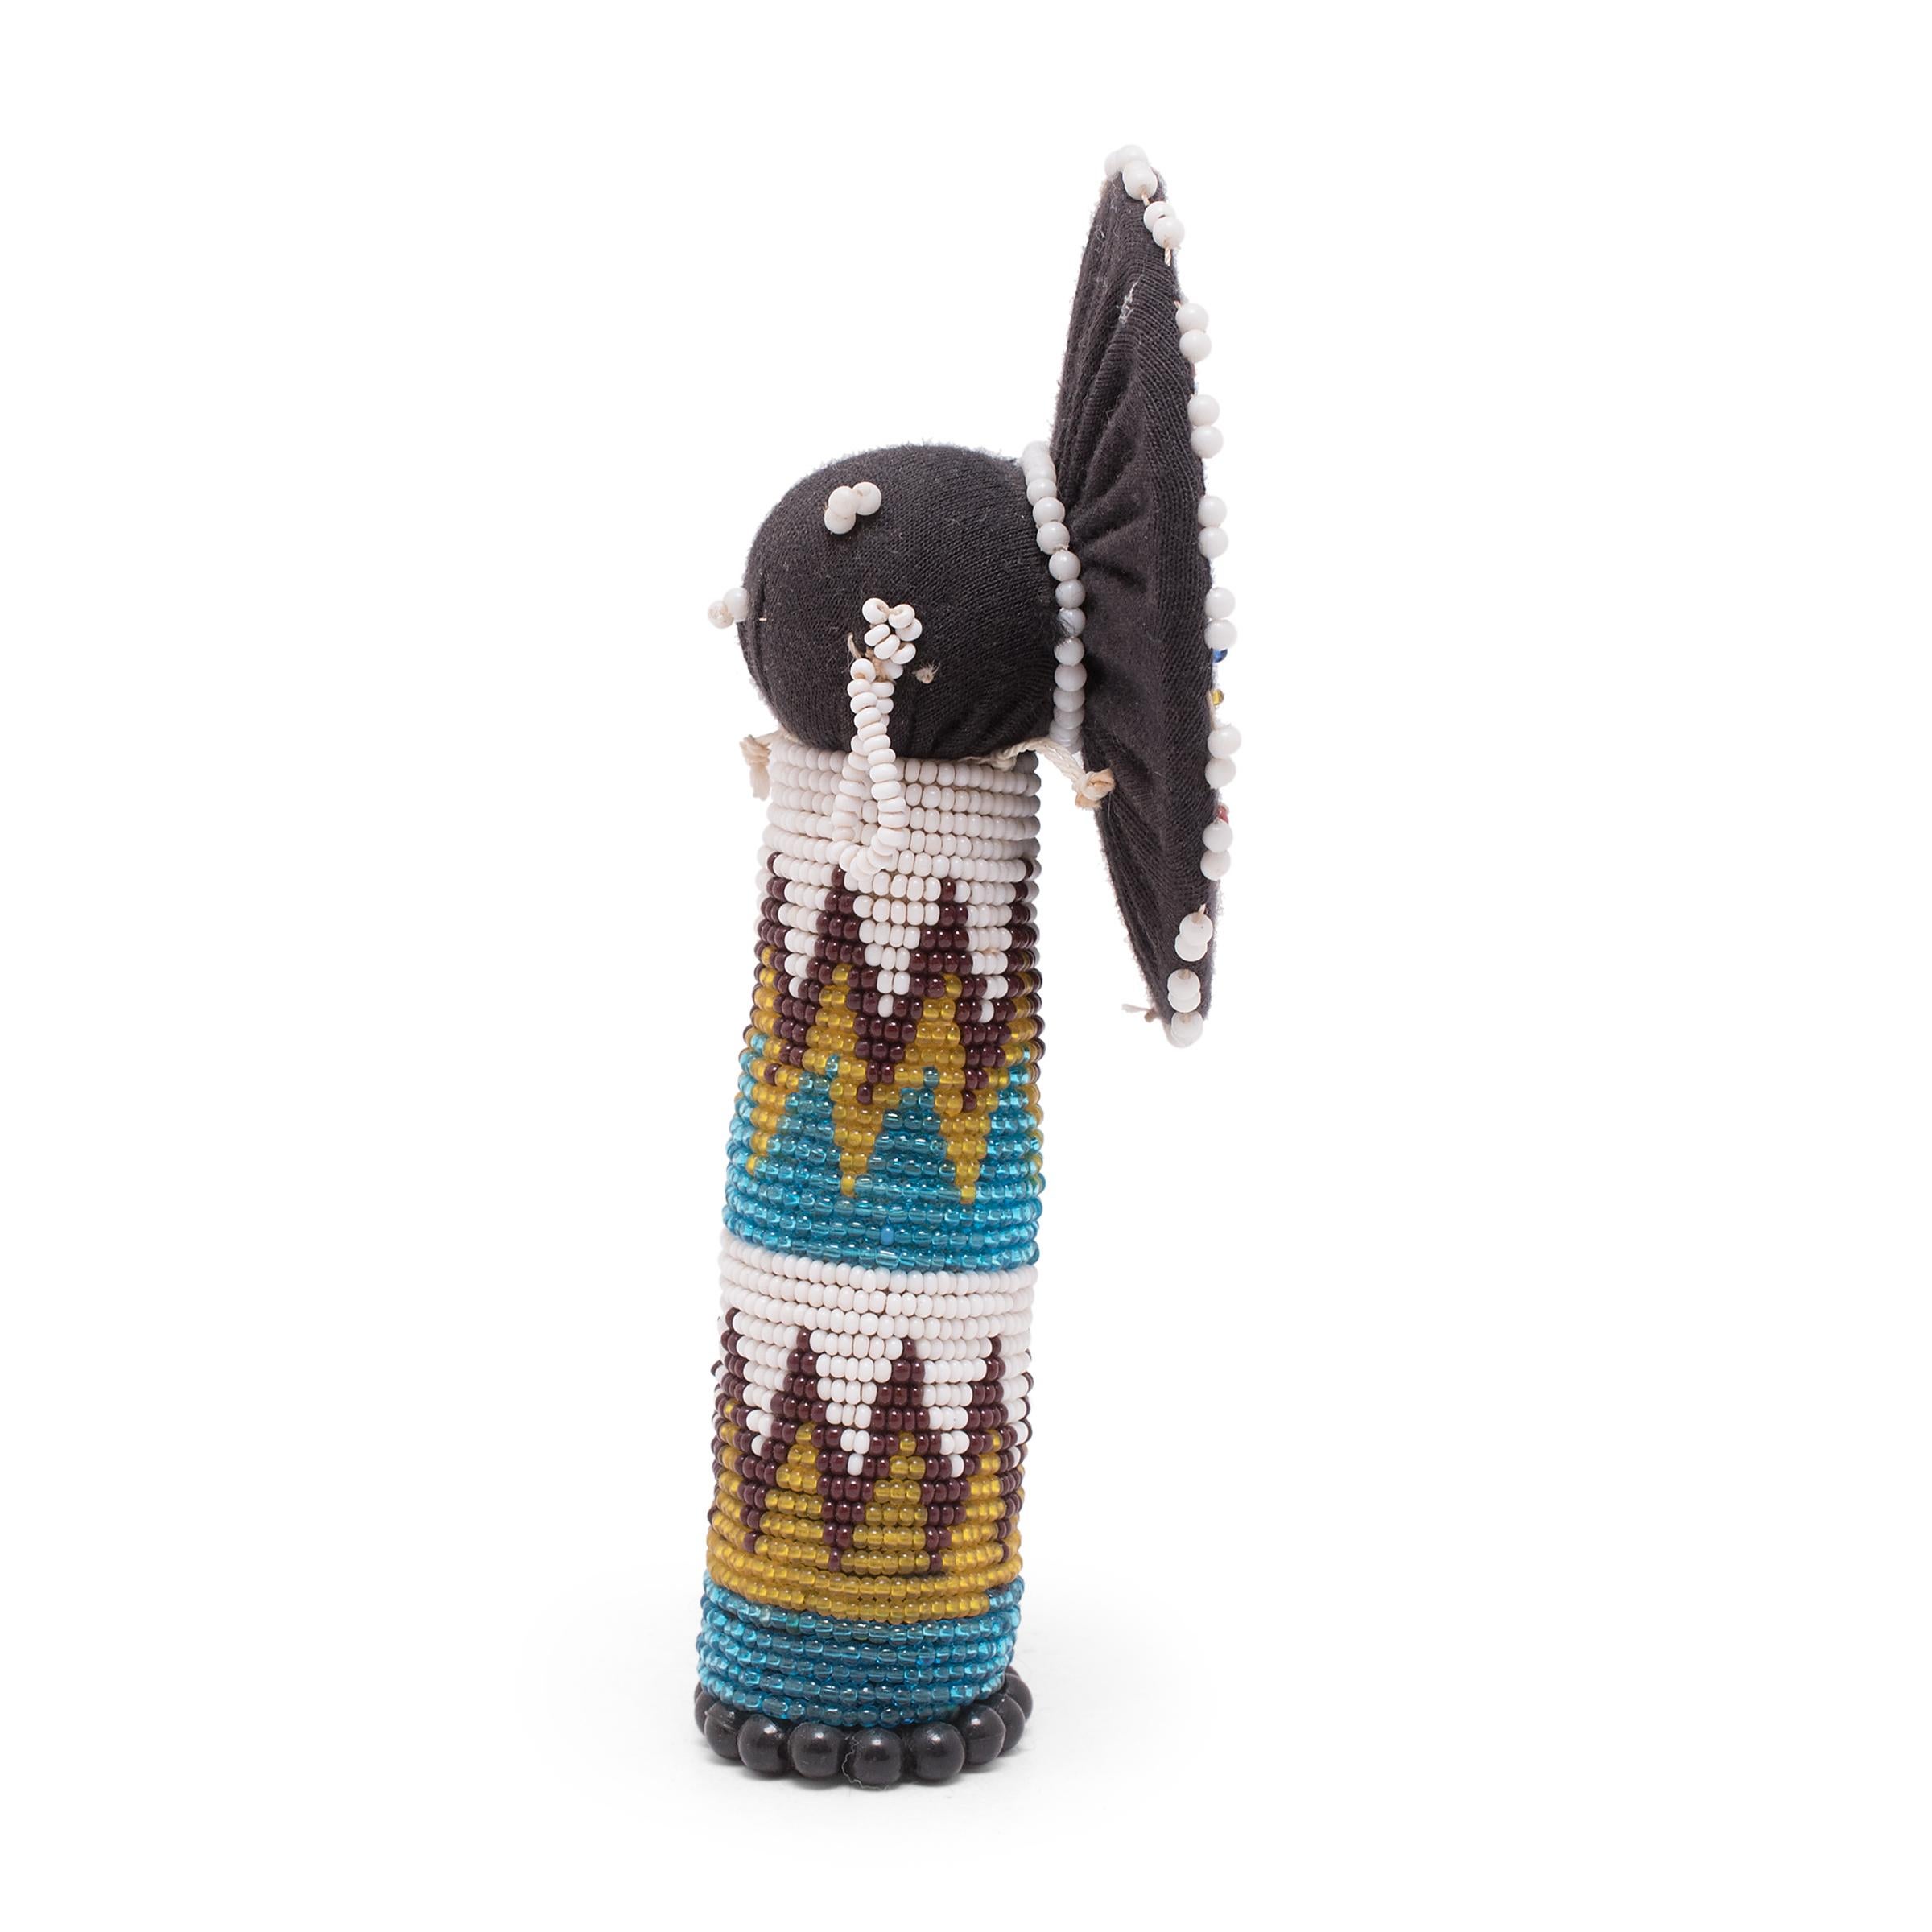 Cotton Collection of Five Petite Ndebele Toy Dolls